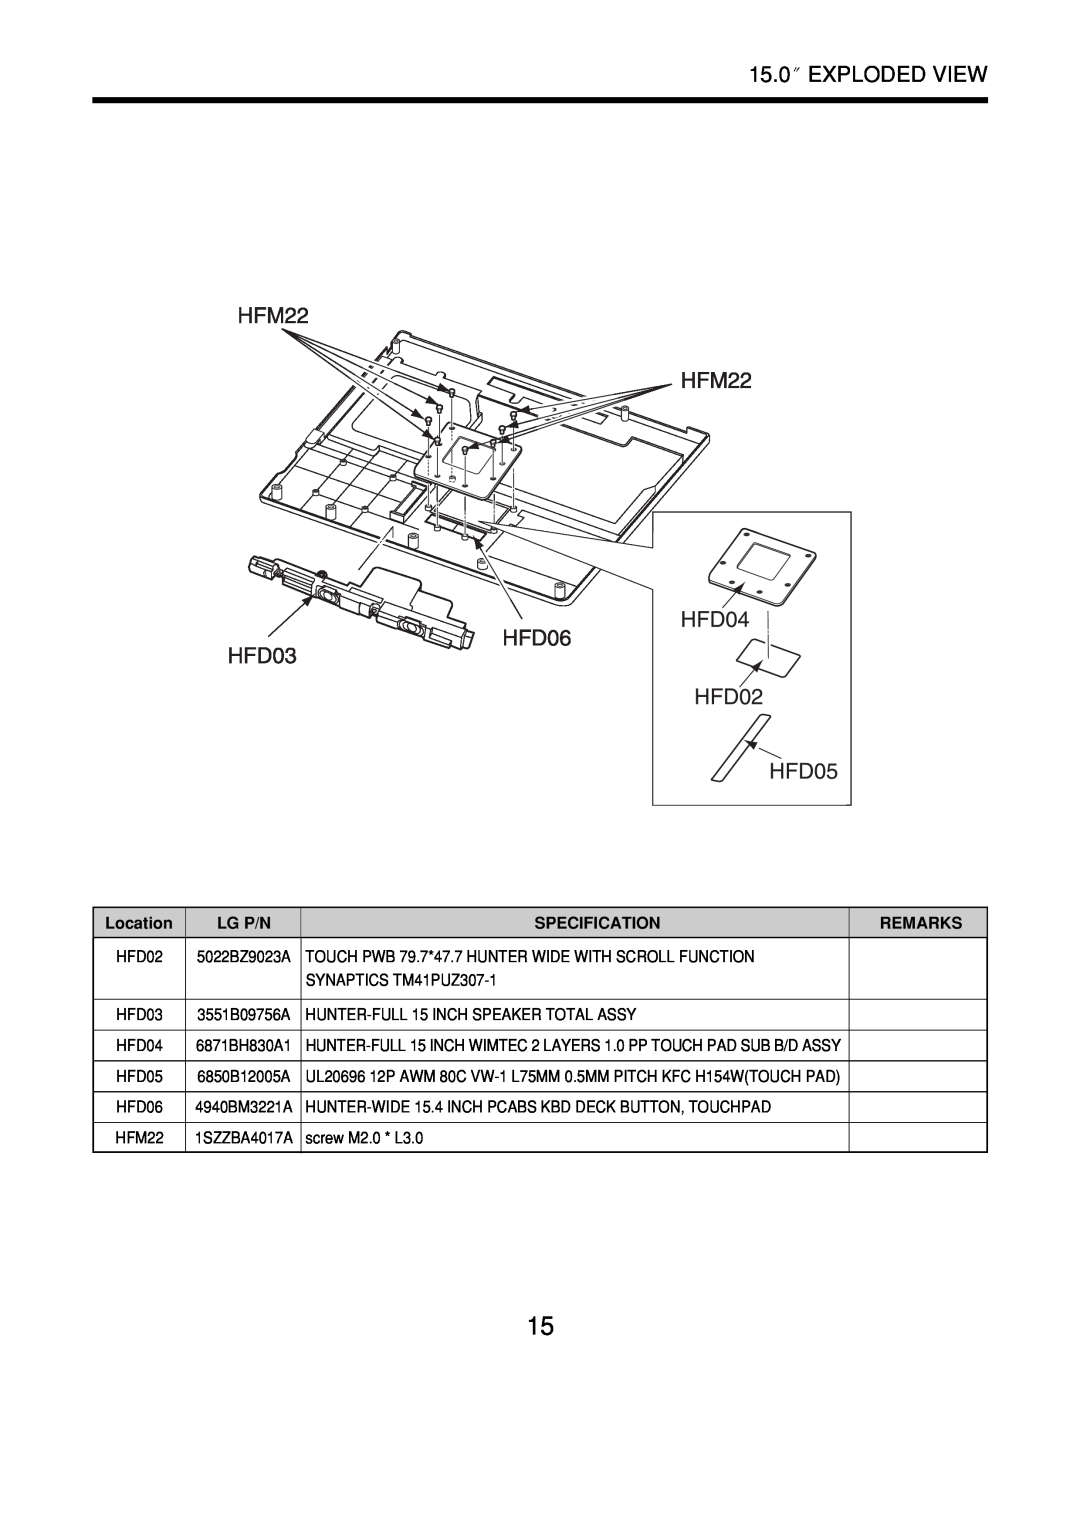 LG Electronics LS70 service manual Exploded View, Location, Lg P/N, Specification, Remarks 